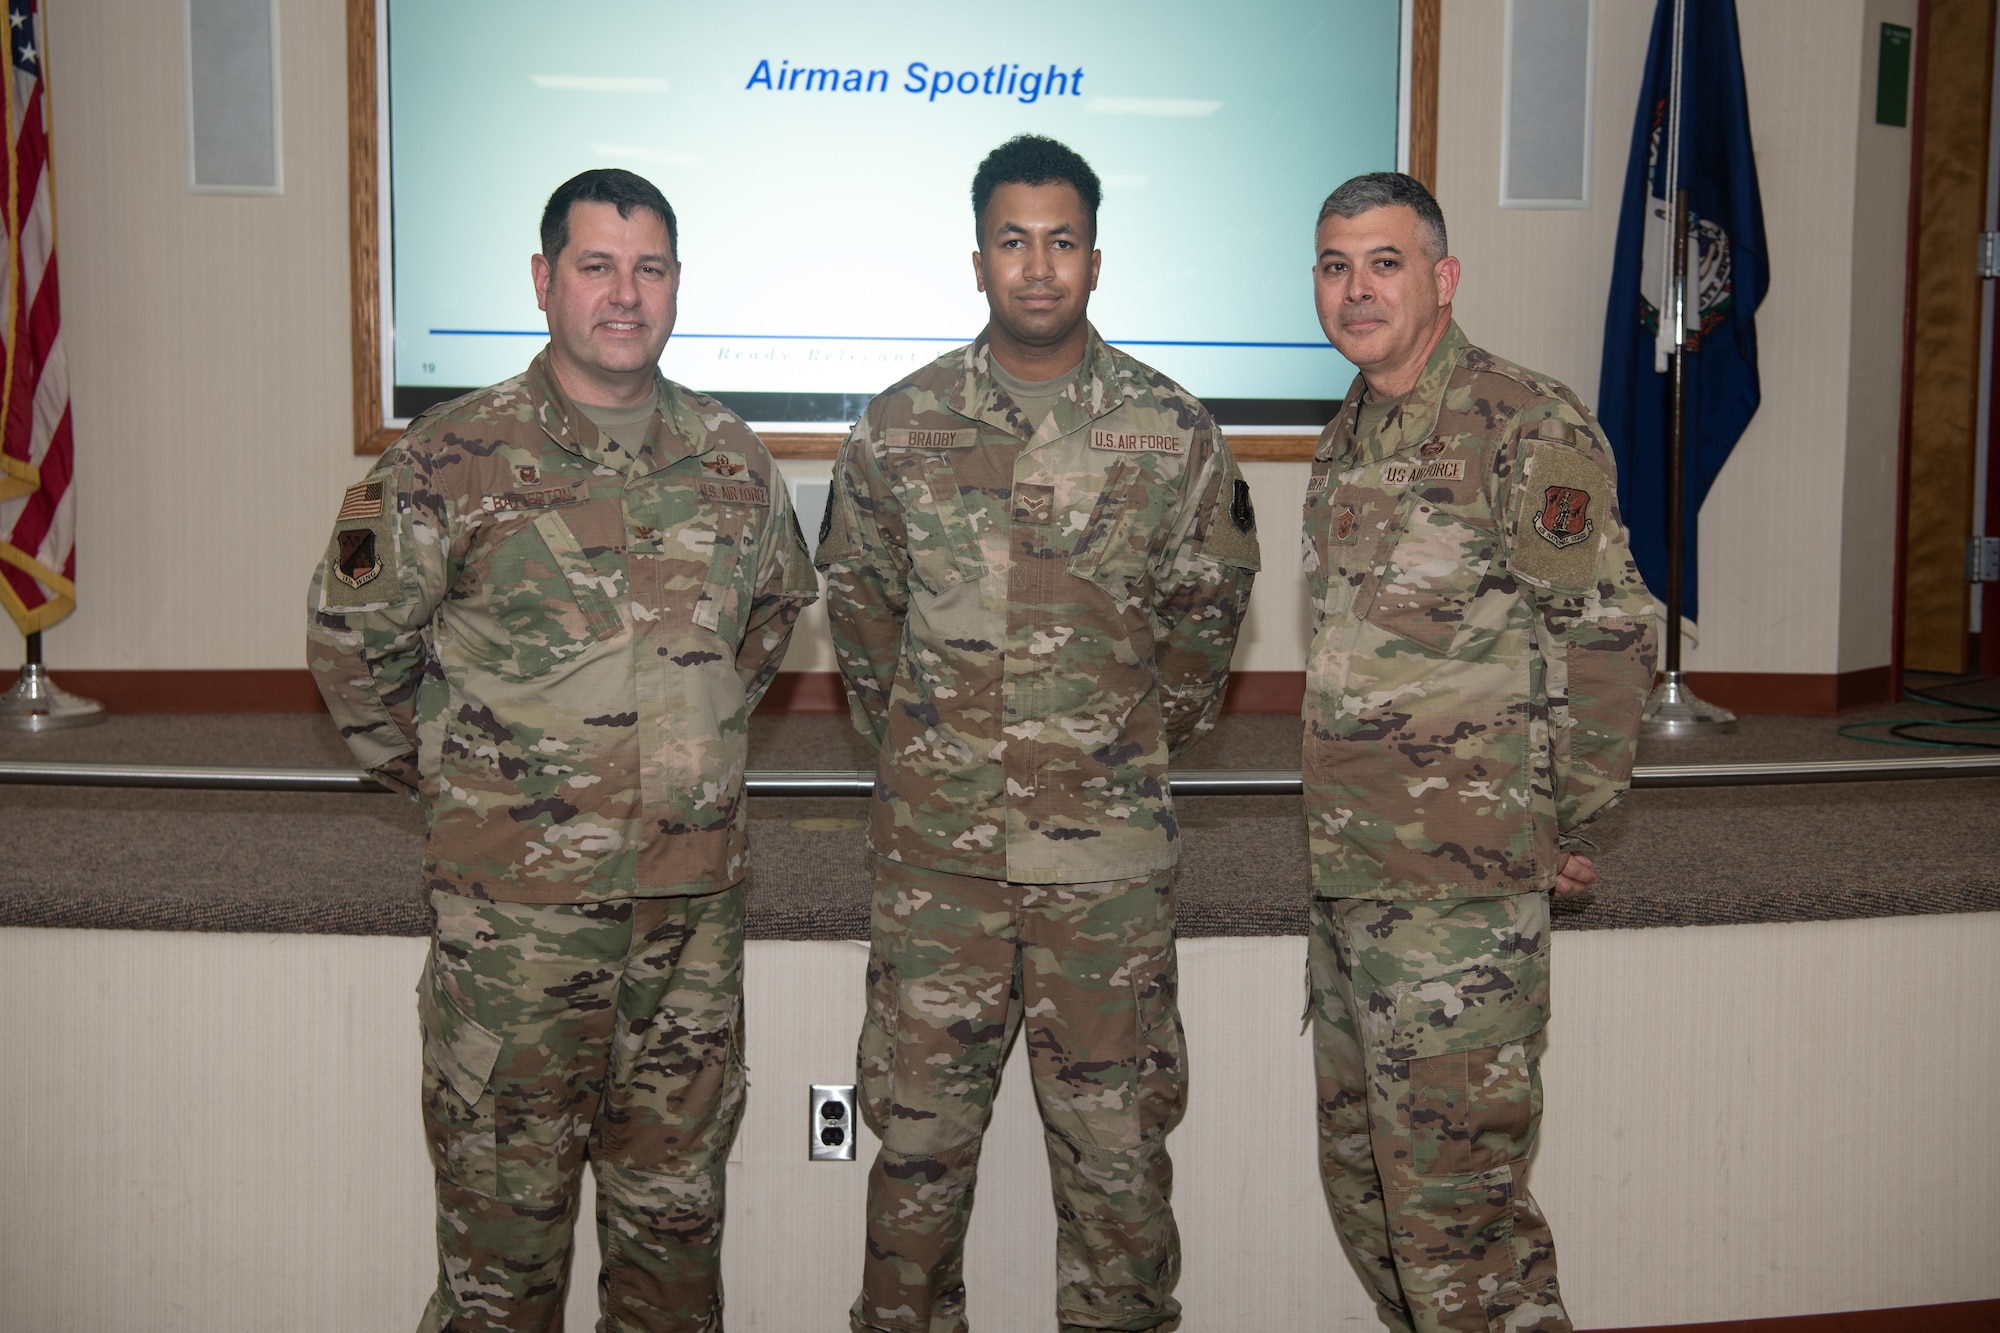 From left, Col. Christopher G. Batterton, 192nd Wing commander, Airman 1st Class Jesse Bradby, 203rd RED HORSE, and Chief Master Sgt. Richard Roberts, 192nd Wing command chief, pose for a photo.